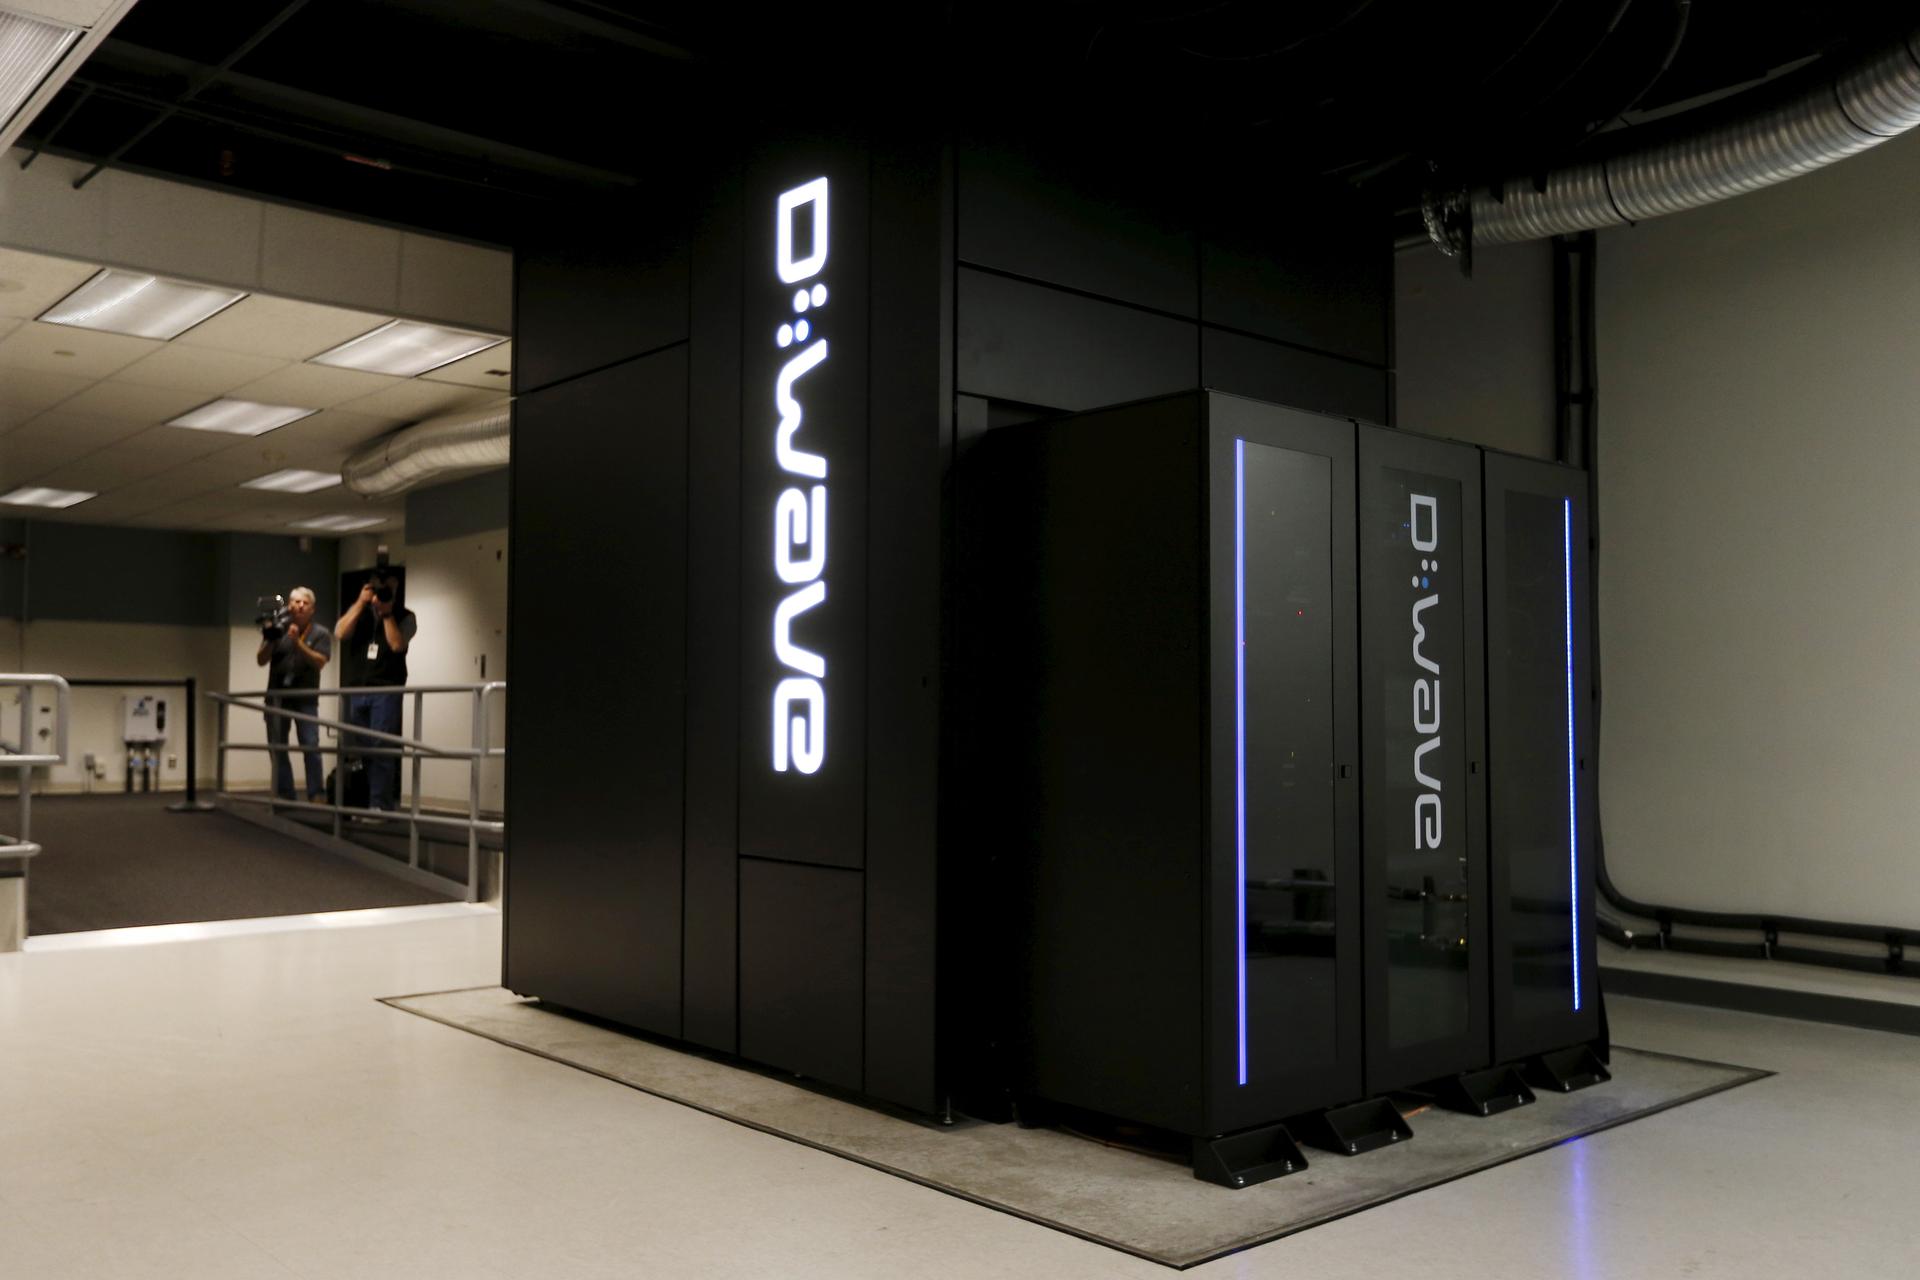 A D-Wave 2X quantum computer is pictured during a media tour of the Quantum Artificial Intelligence Laboratory (QuAIL) at NASA Ames Research Center in Mountain View, California, December 8, 2015.